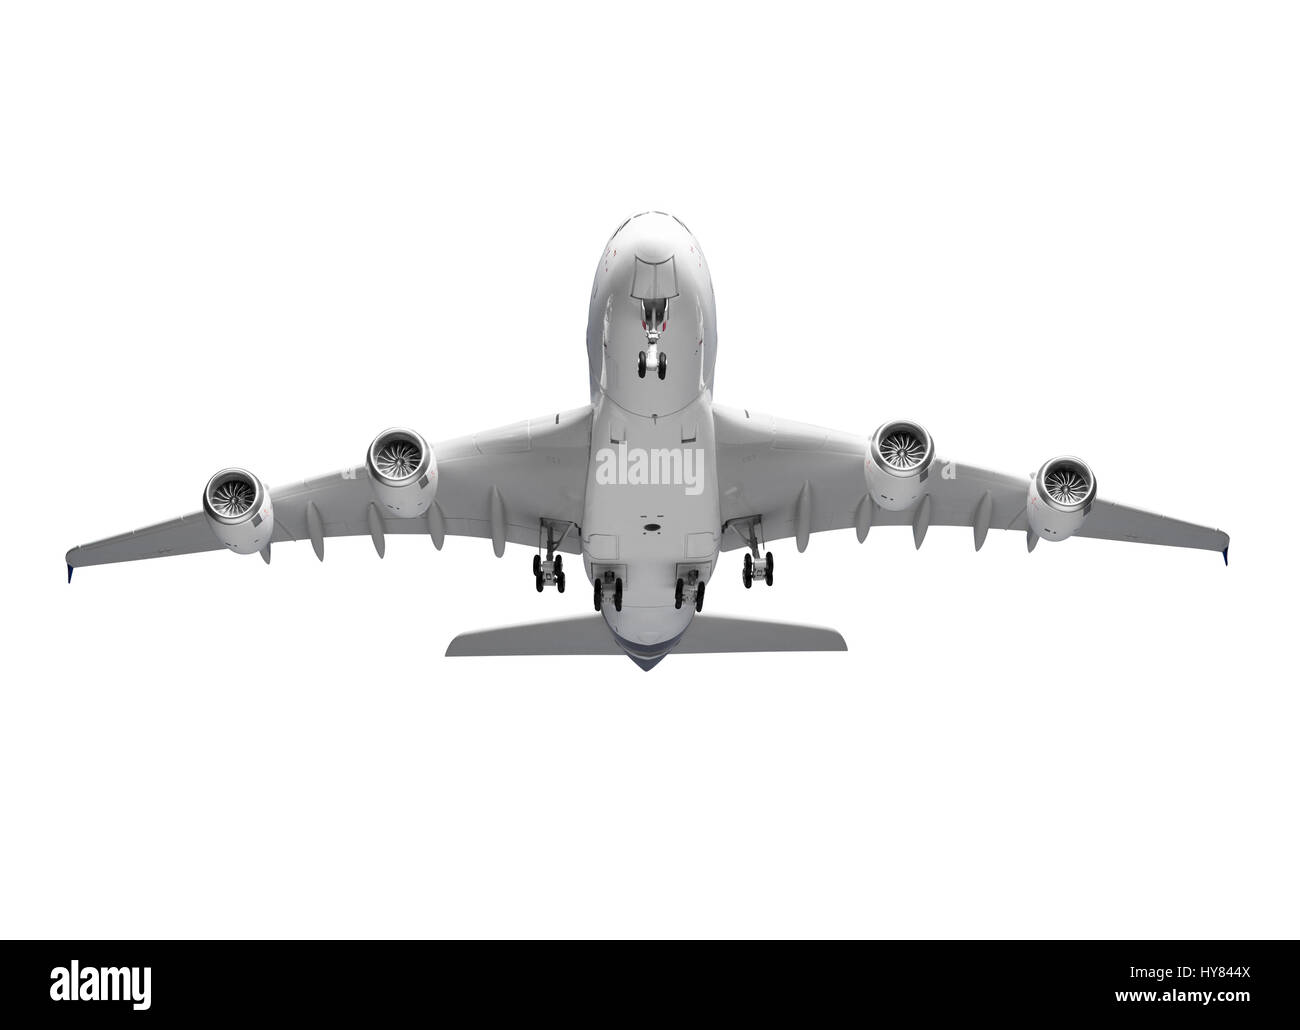 Airplane isolated on white background with clipping path Stock Photo